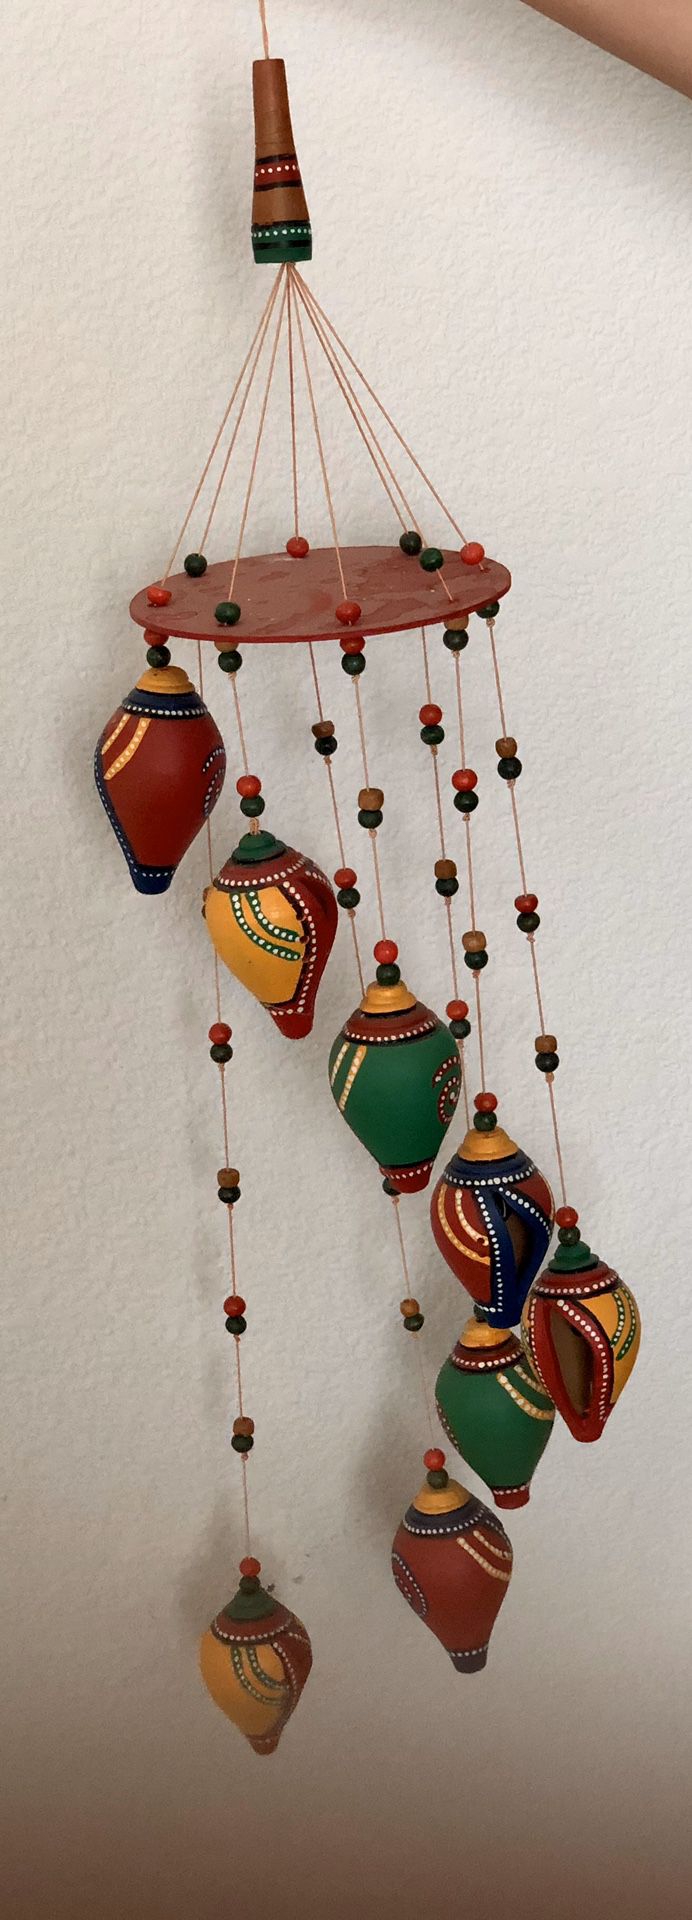 Multicolor Teracotta Shankh Wind Chime by Unravel India